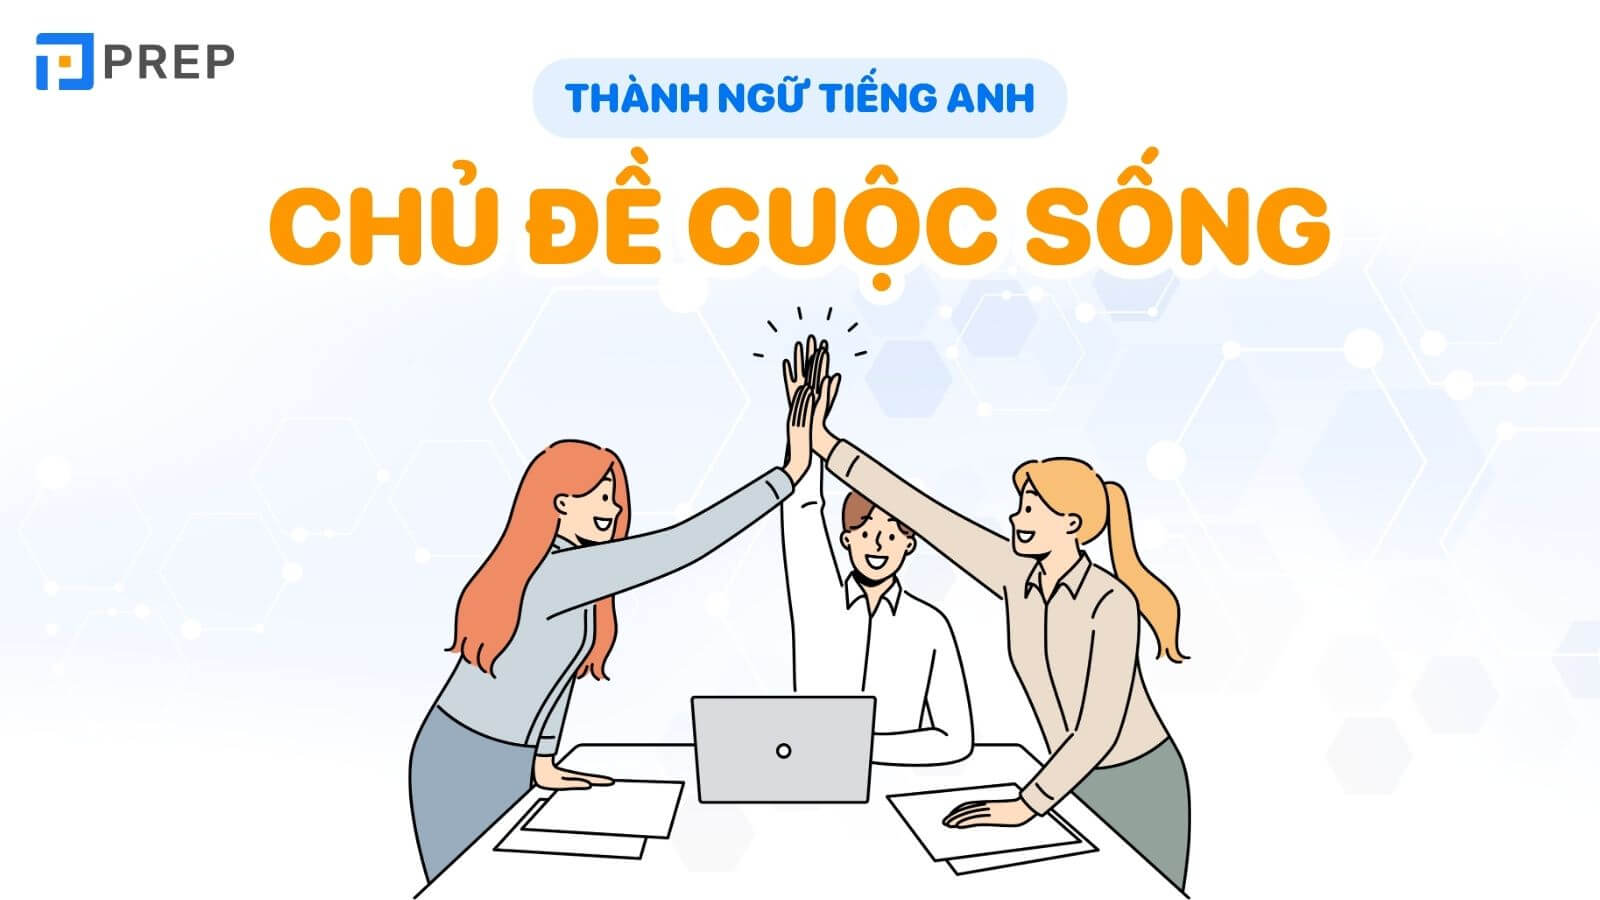 thanh-ngu-tieng-anh-ve-cuoc-song.jpg